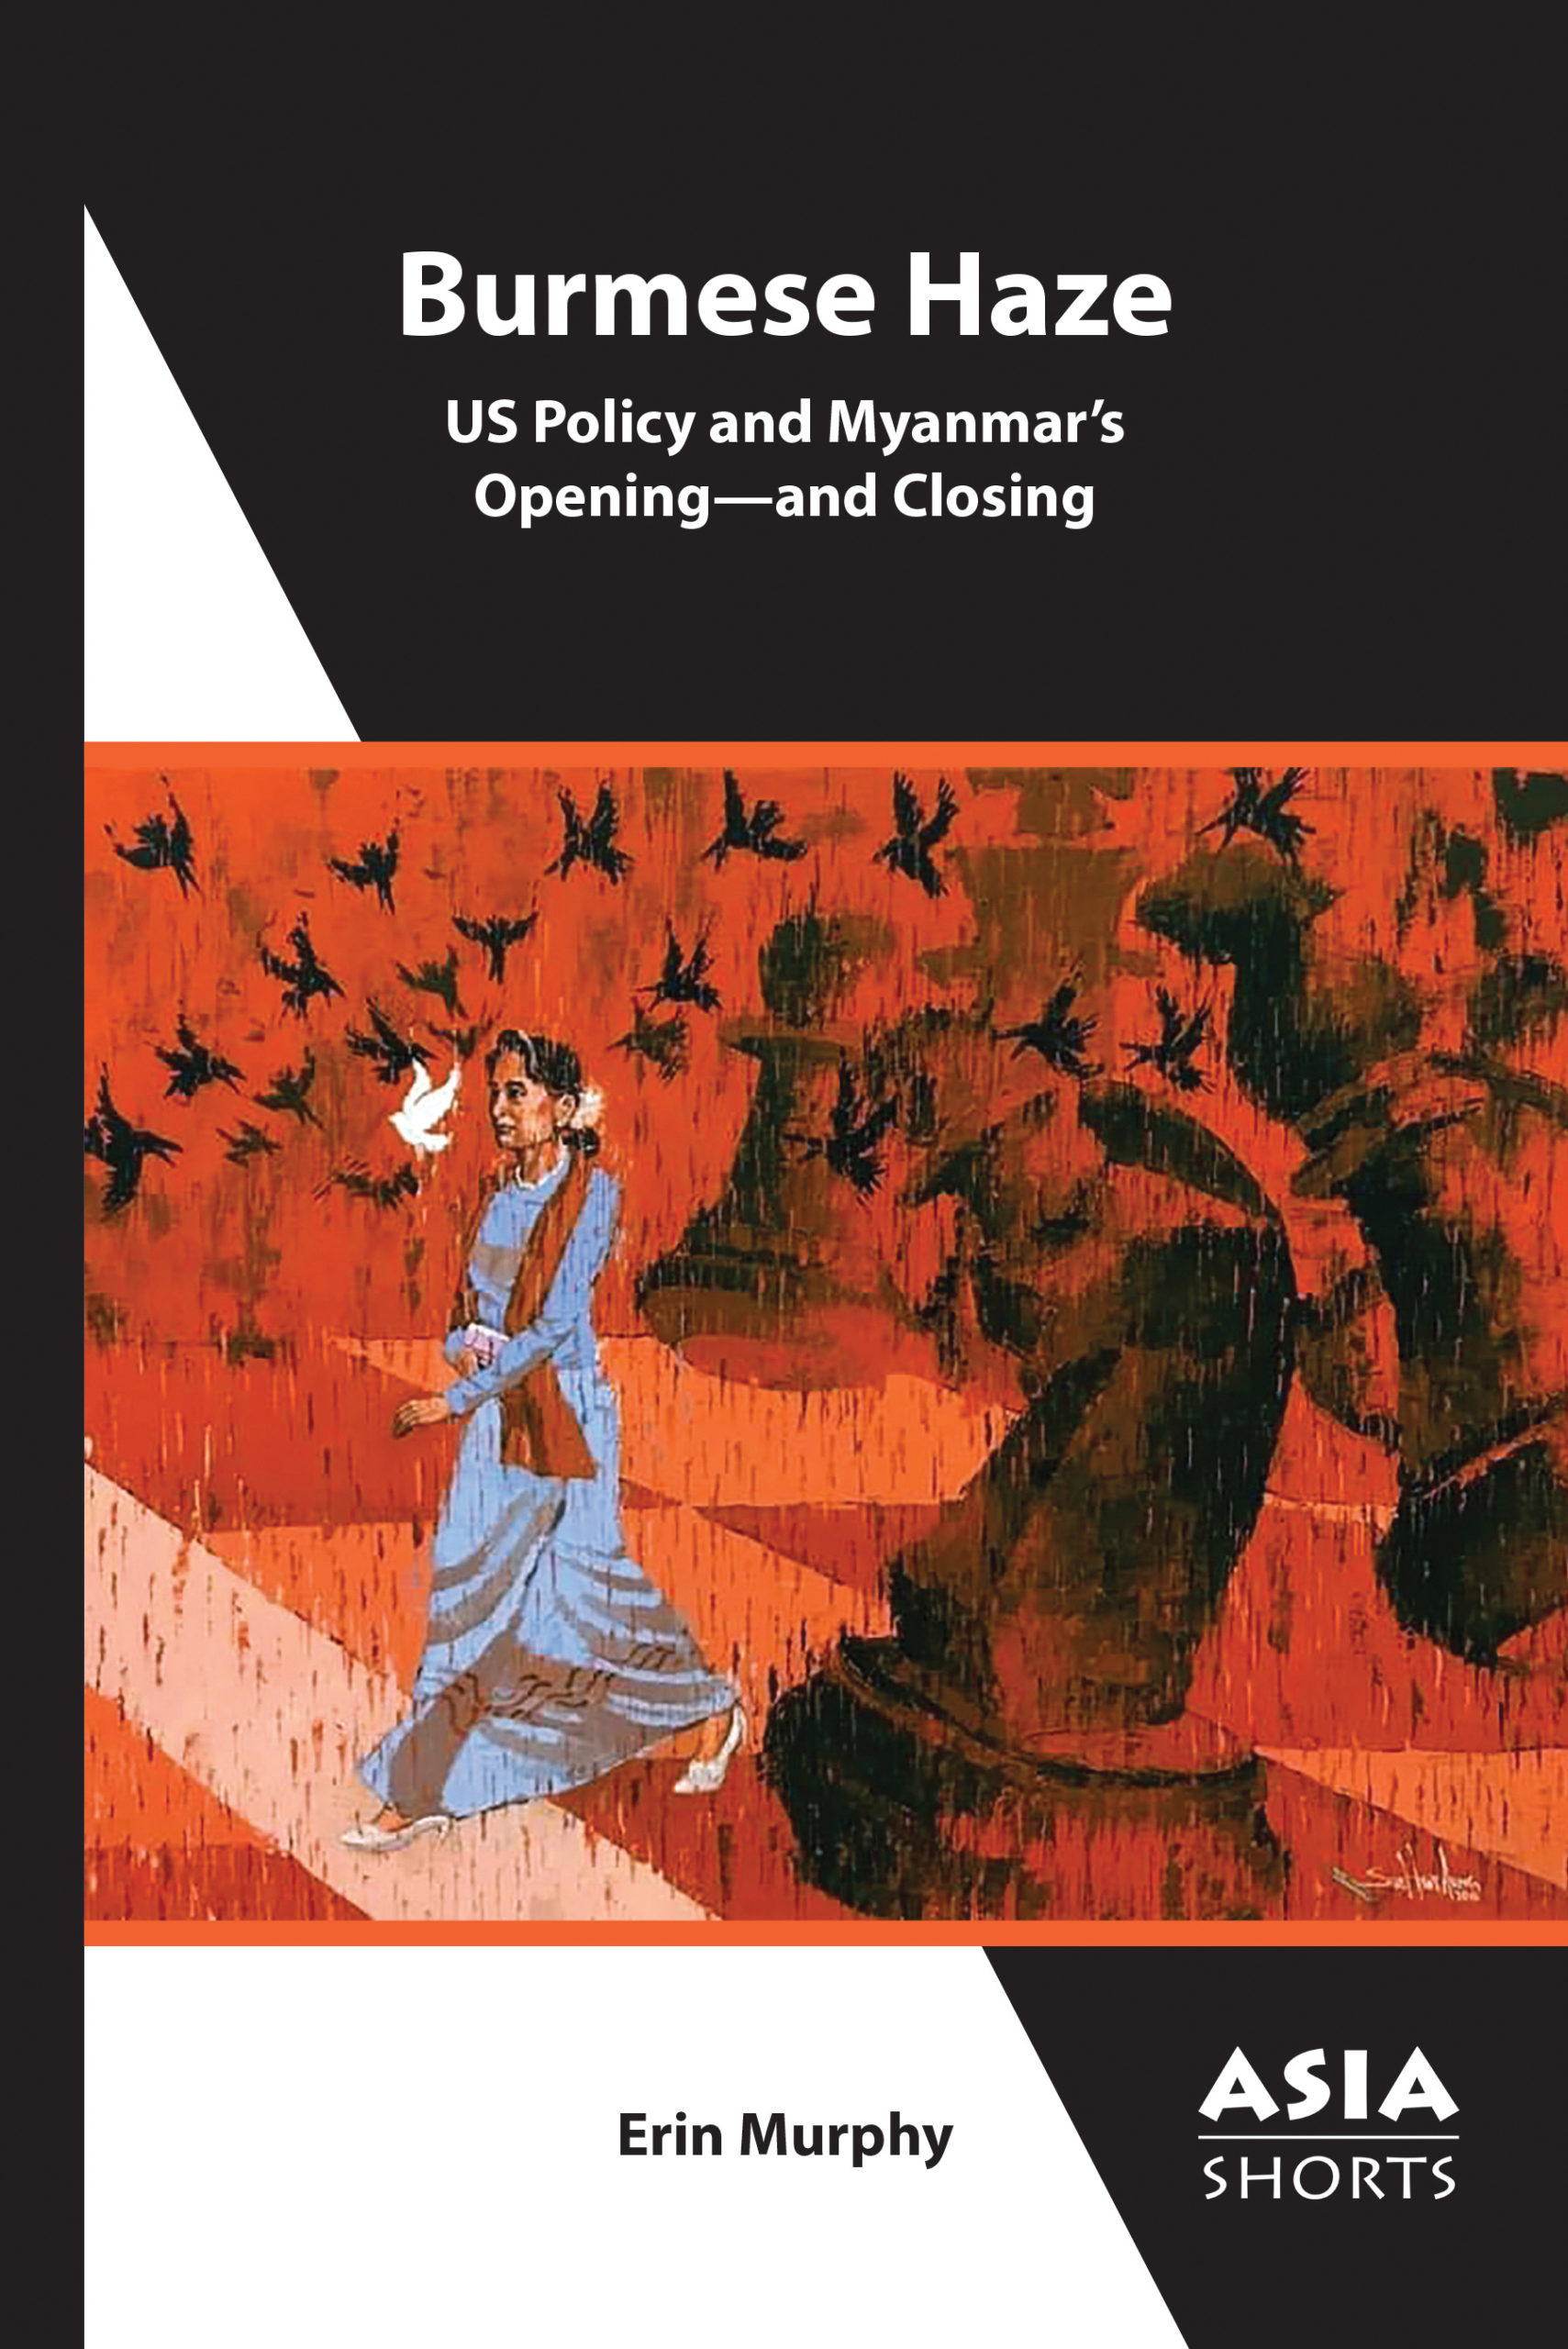 Cover of Burmese Haze: US Policy and Myanmar’s Opening—and Closing, by Erin Murphy